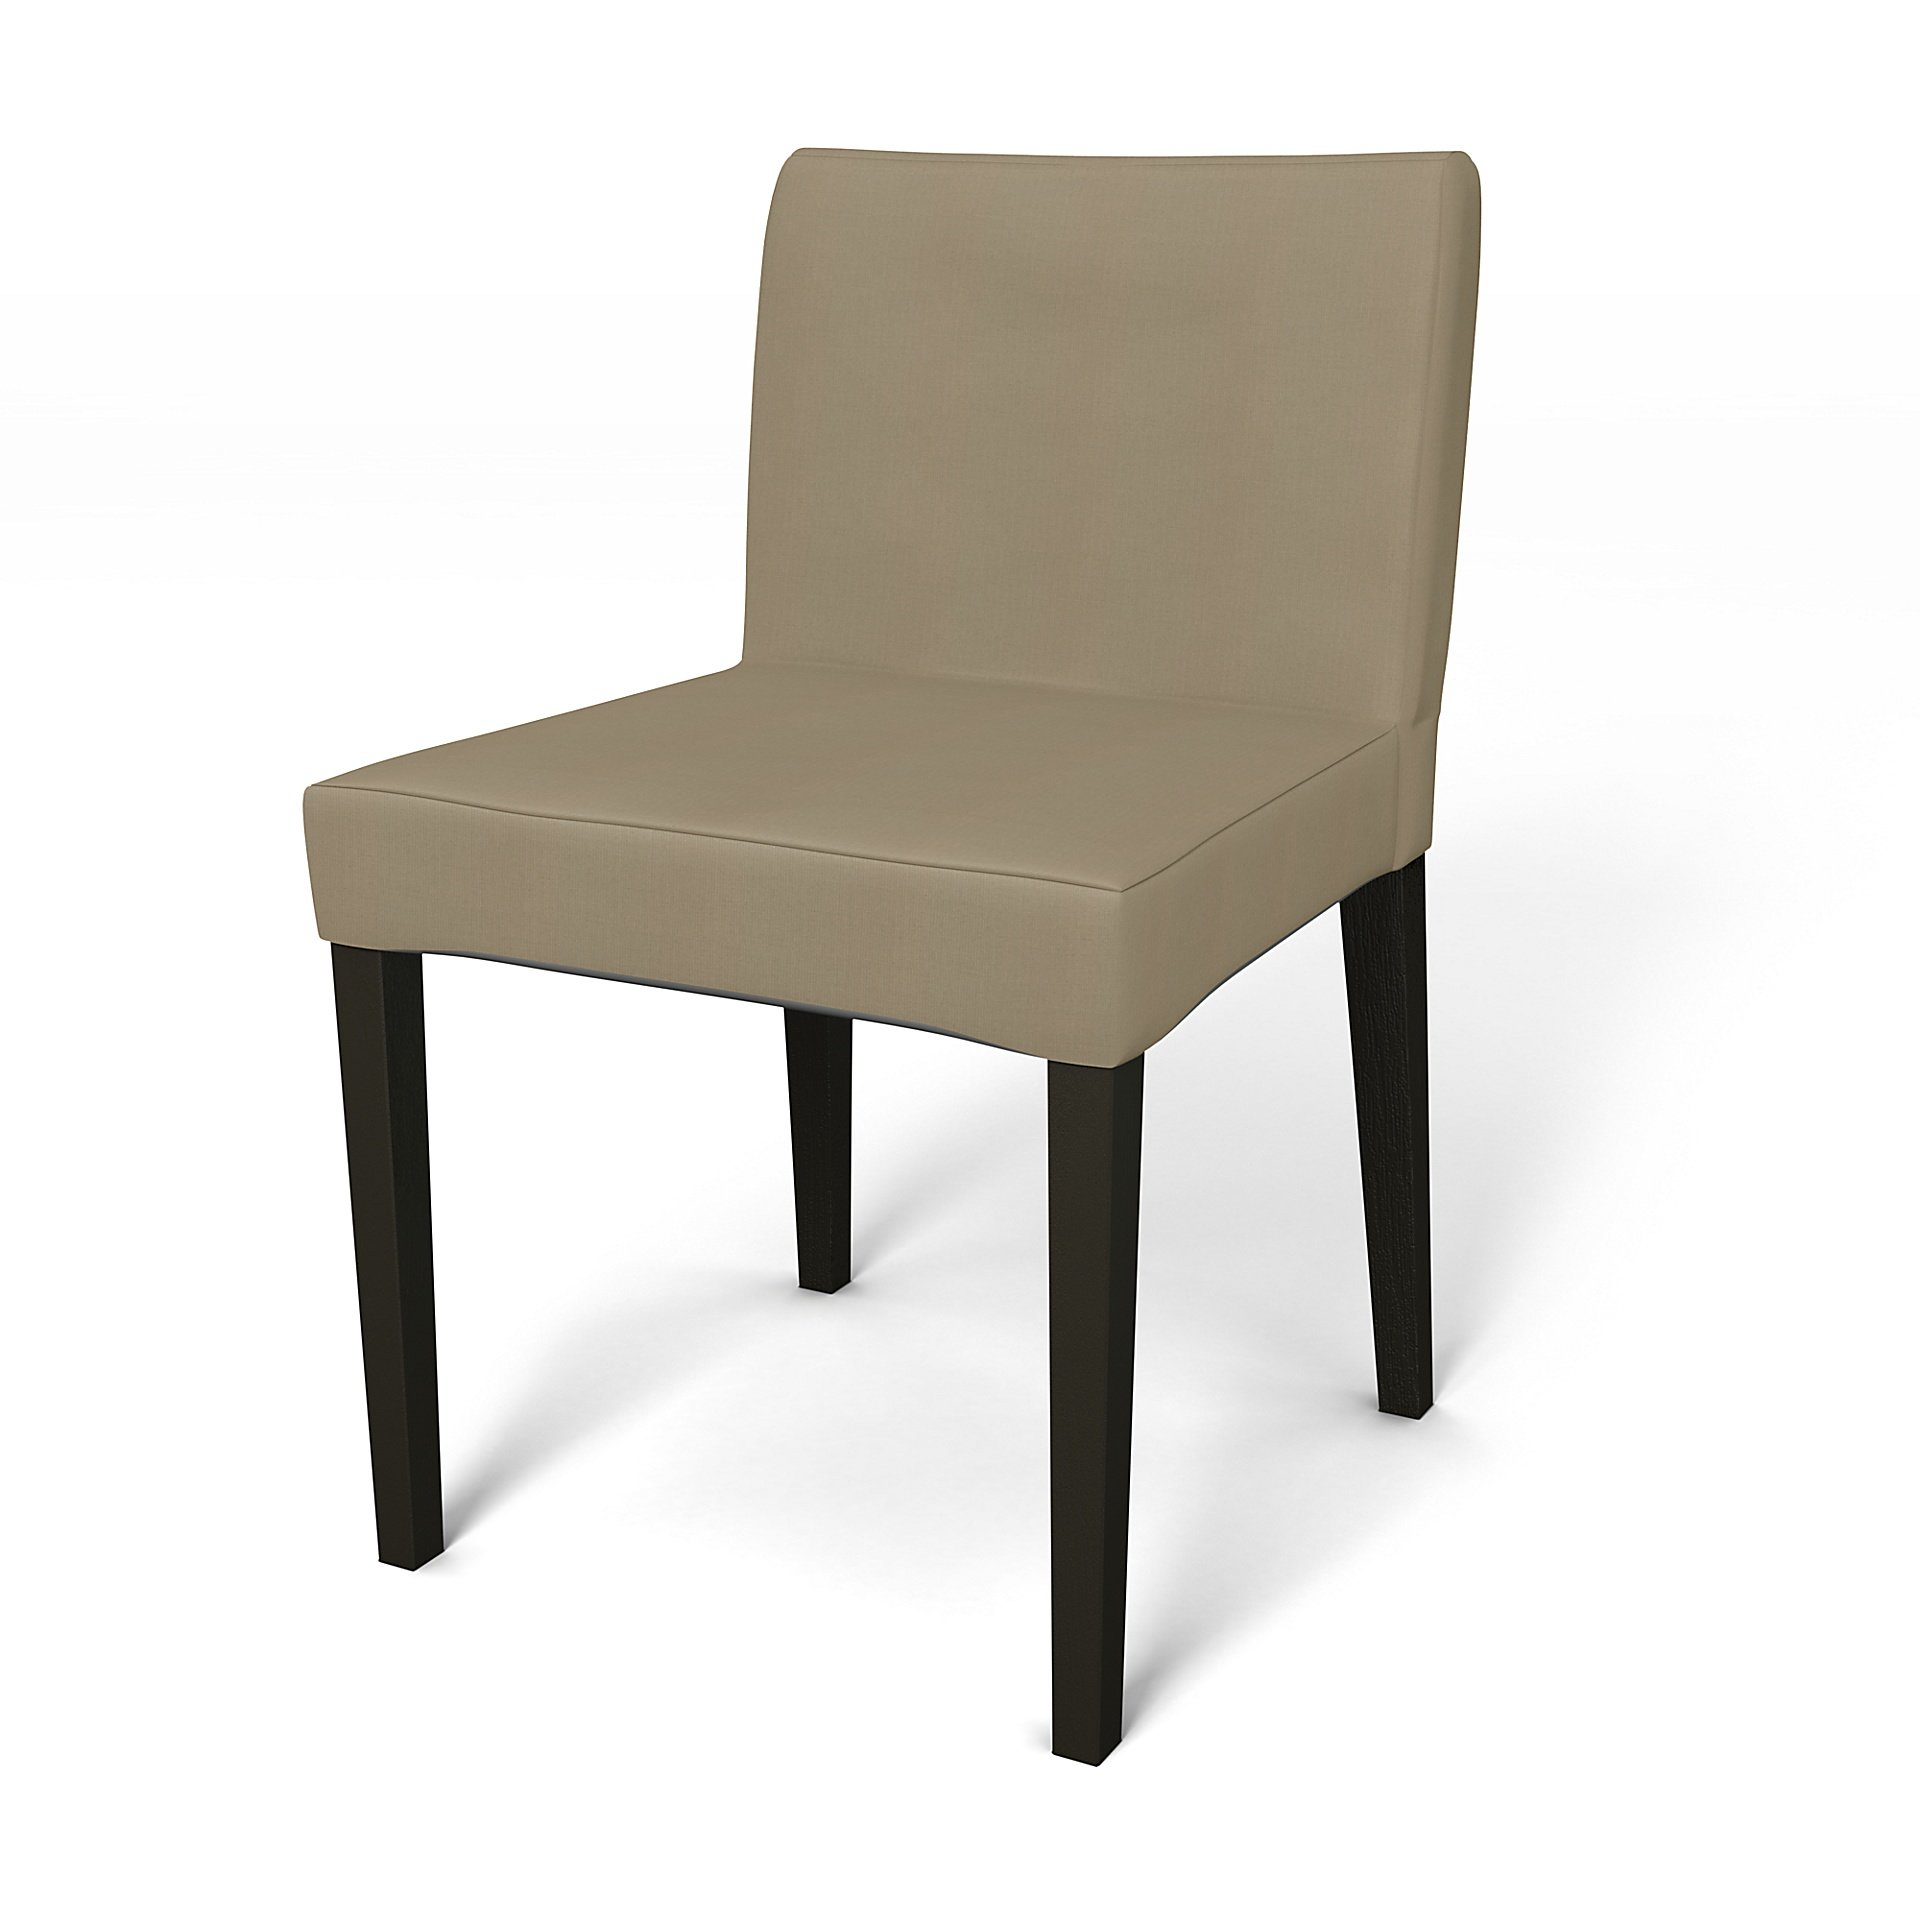 IKEA - Nils Dining Chair Cover, Dark Sand, Outdoor - Bemz